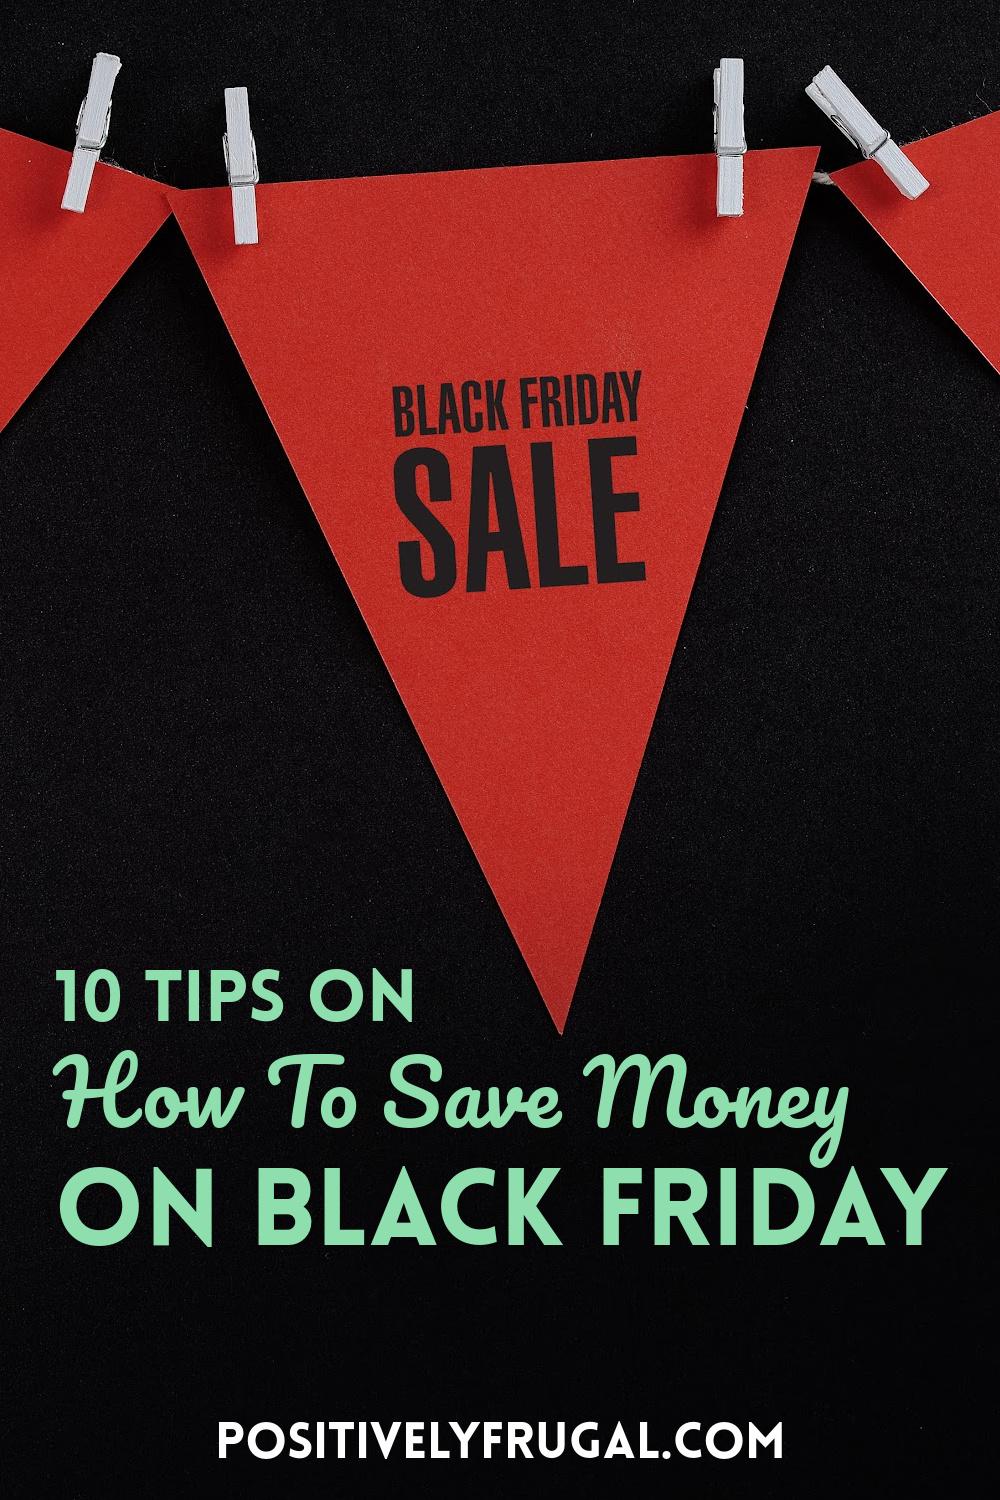 10 Tips on How To Save Money on Black Friday by PositivelyFrugal.com